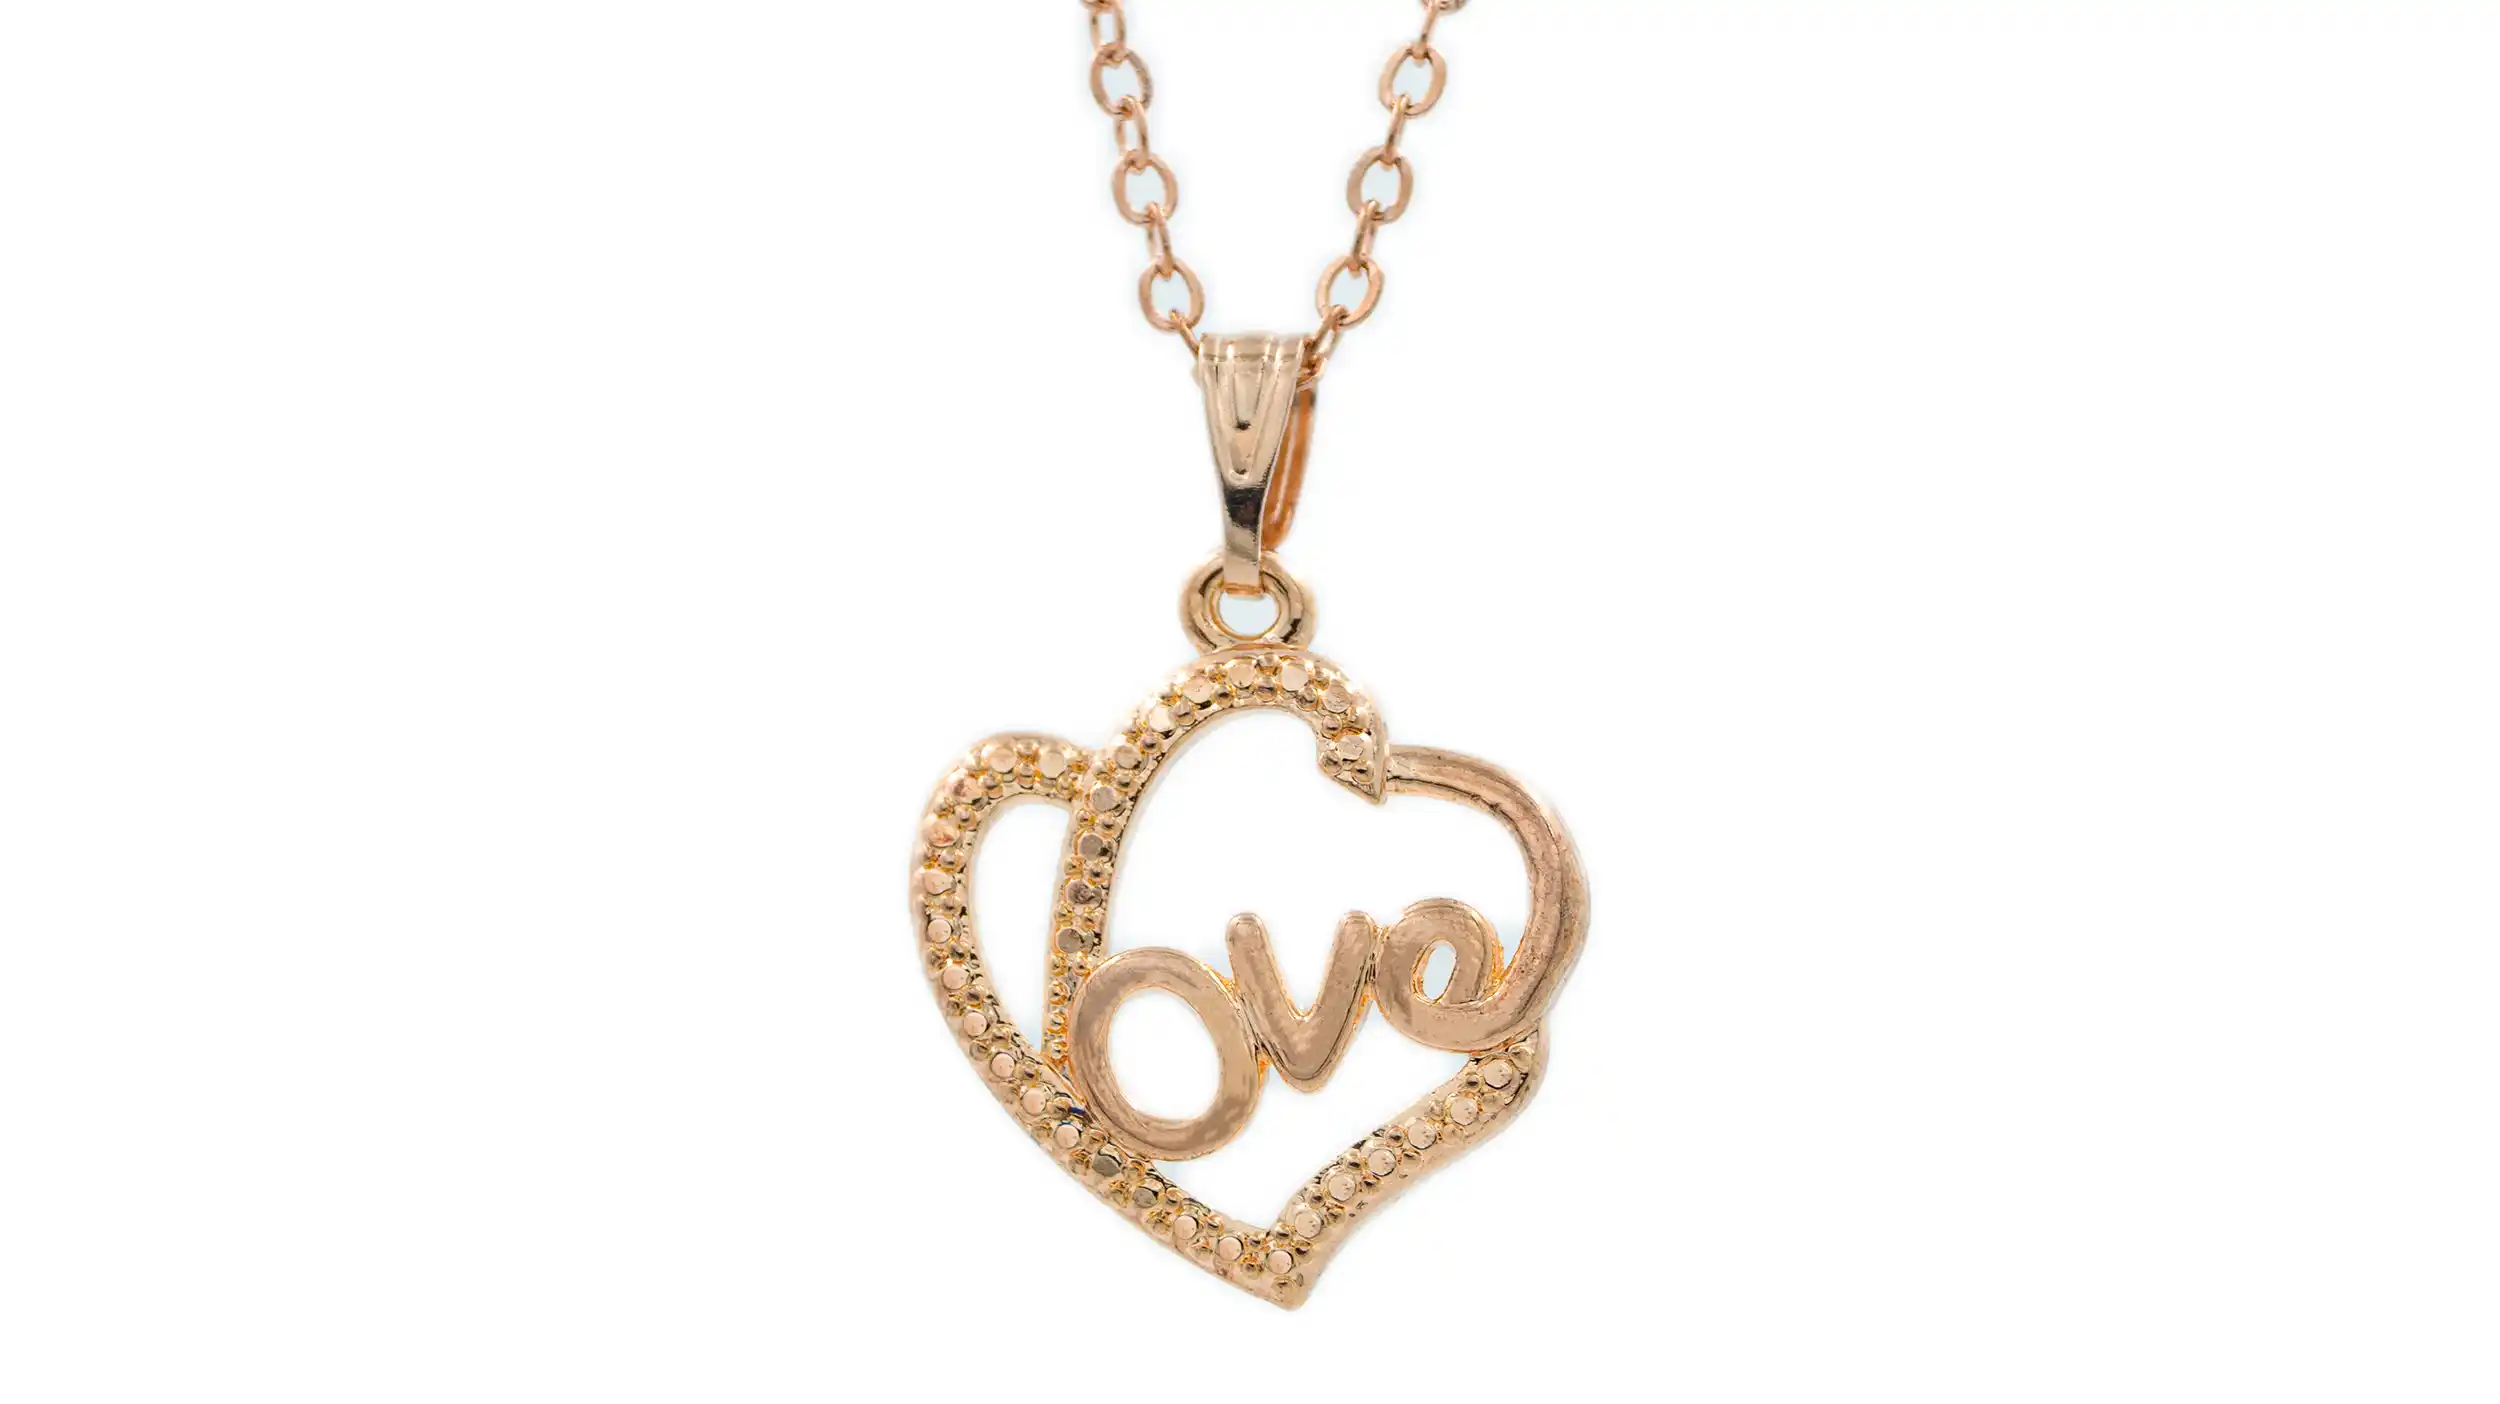 Annika Inez Gold Plated Heart Necklace Large - At Present